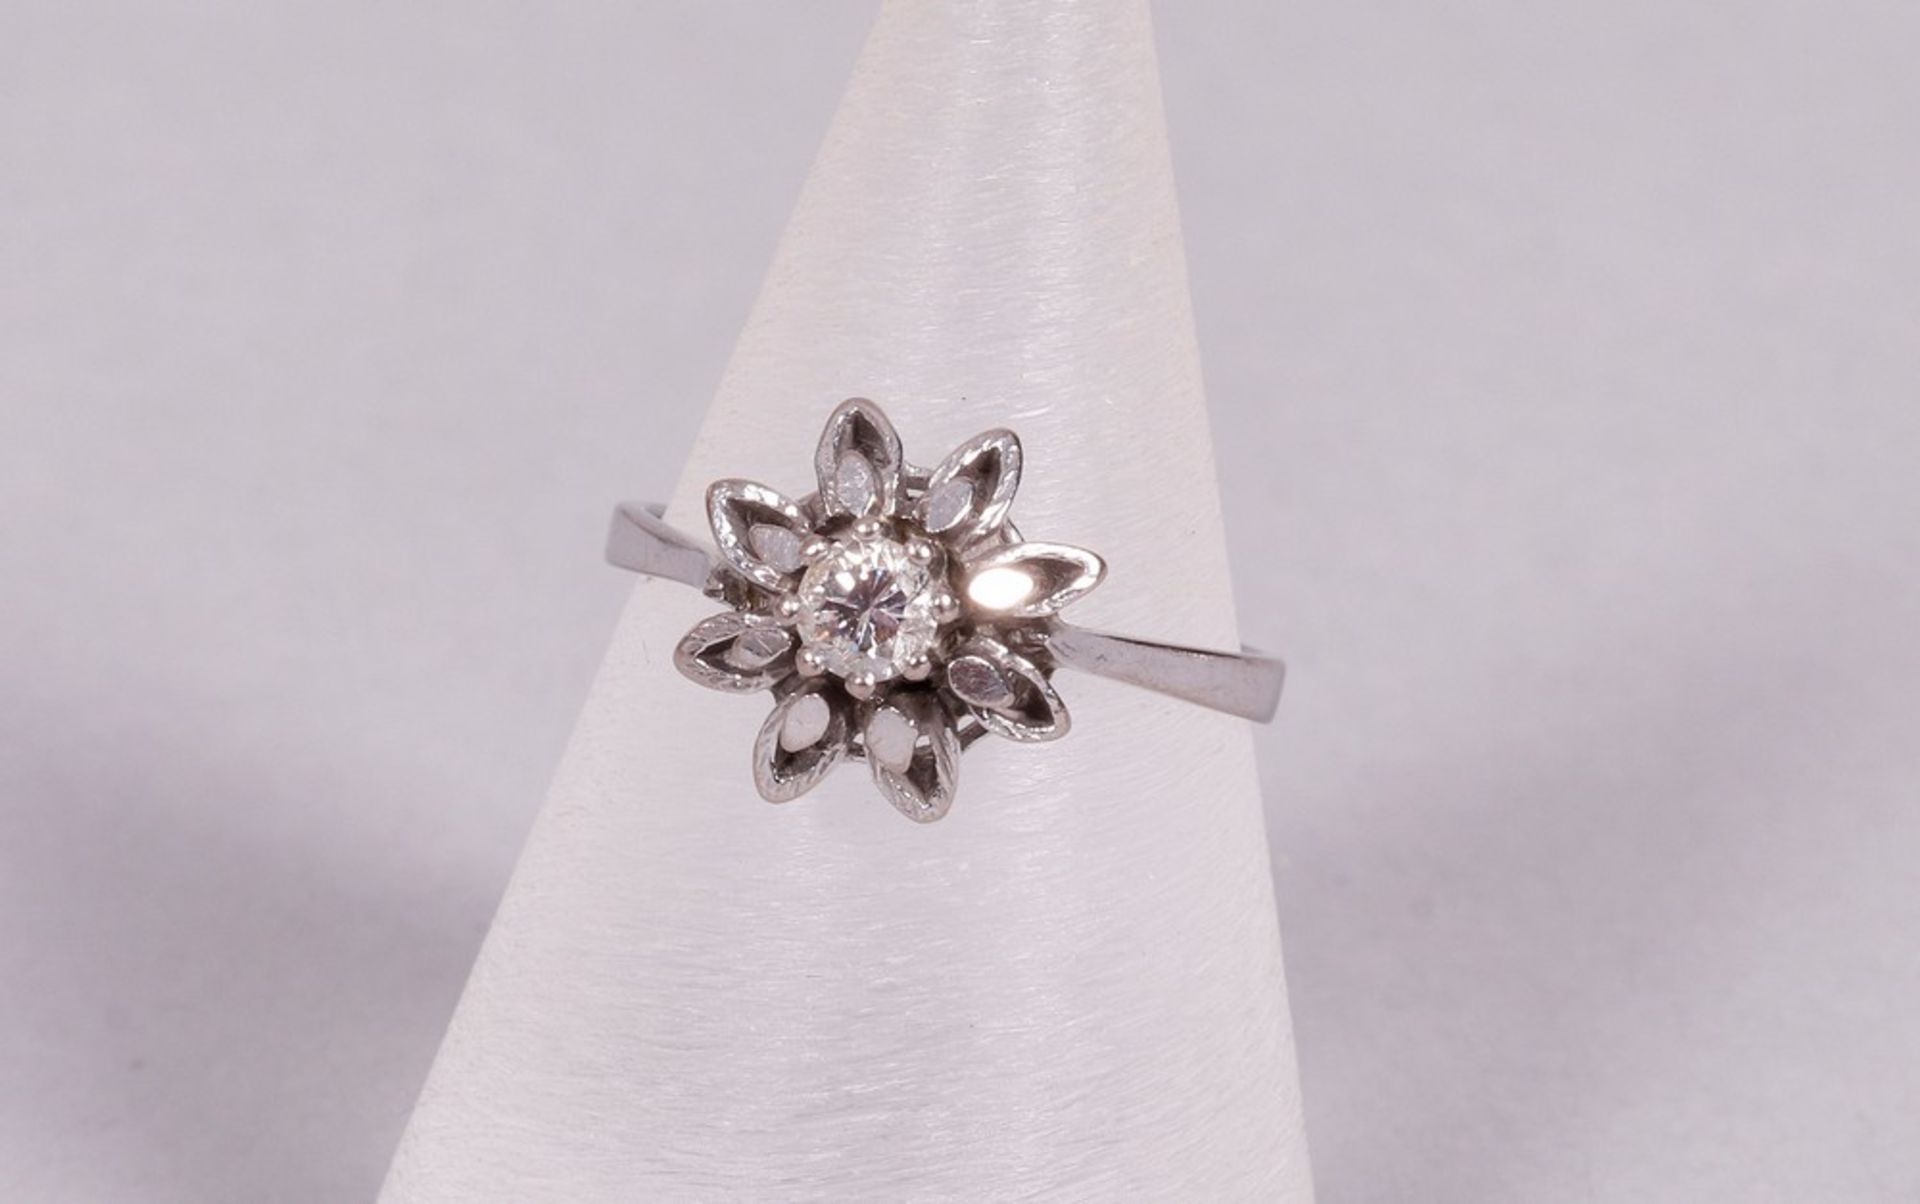 Solitaire ring, 585 WG